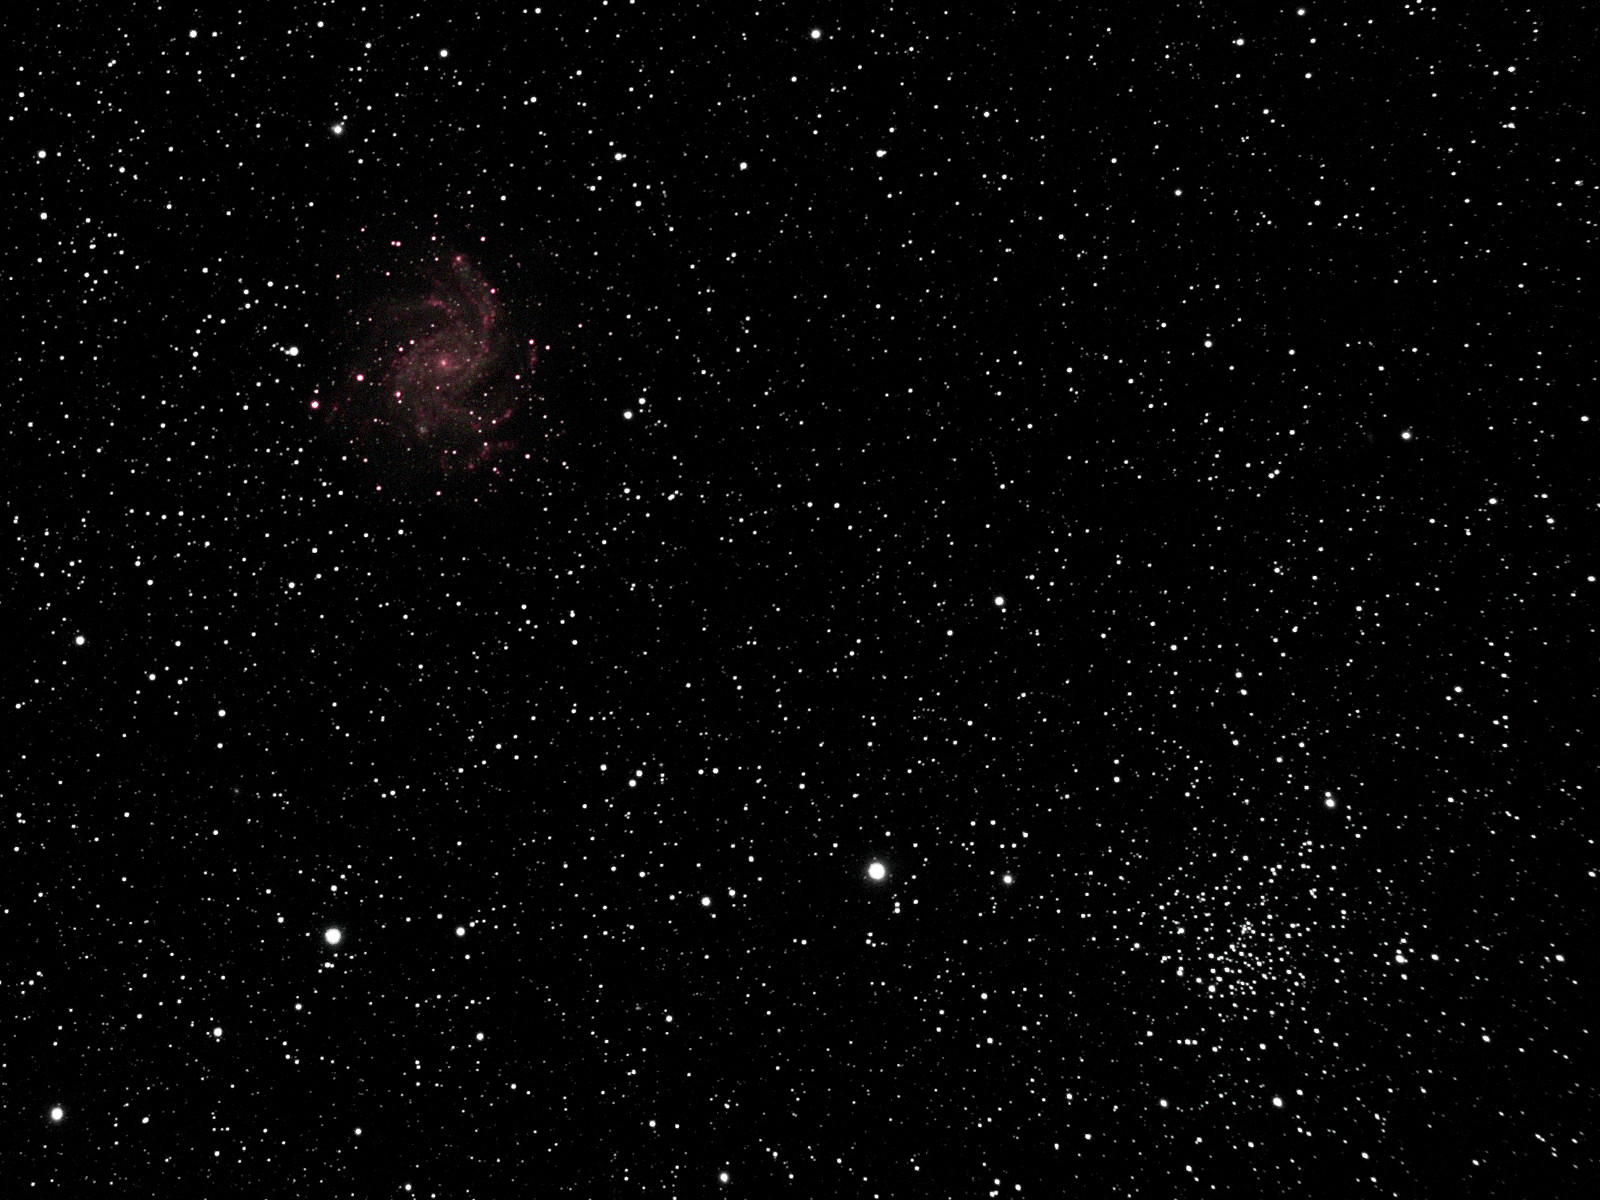 Fireworks Galaxy and Flying Geese Cluster